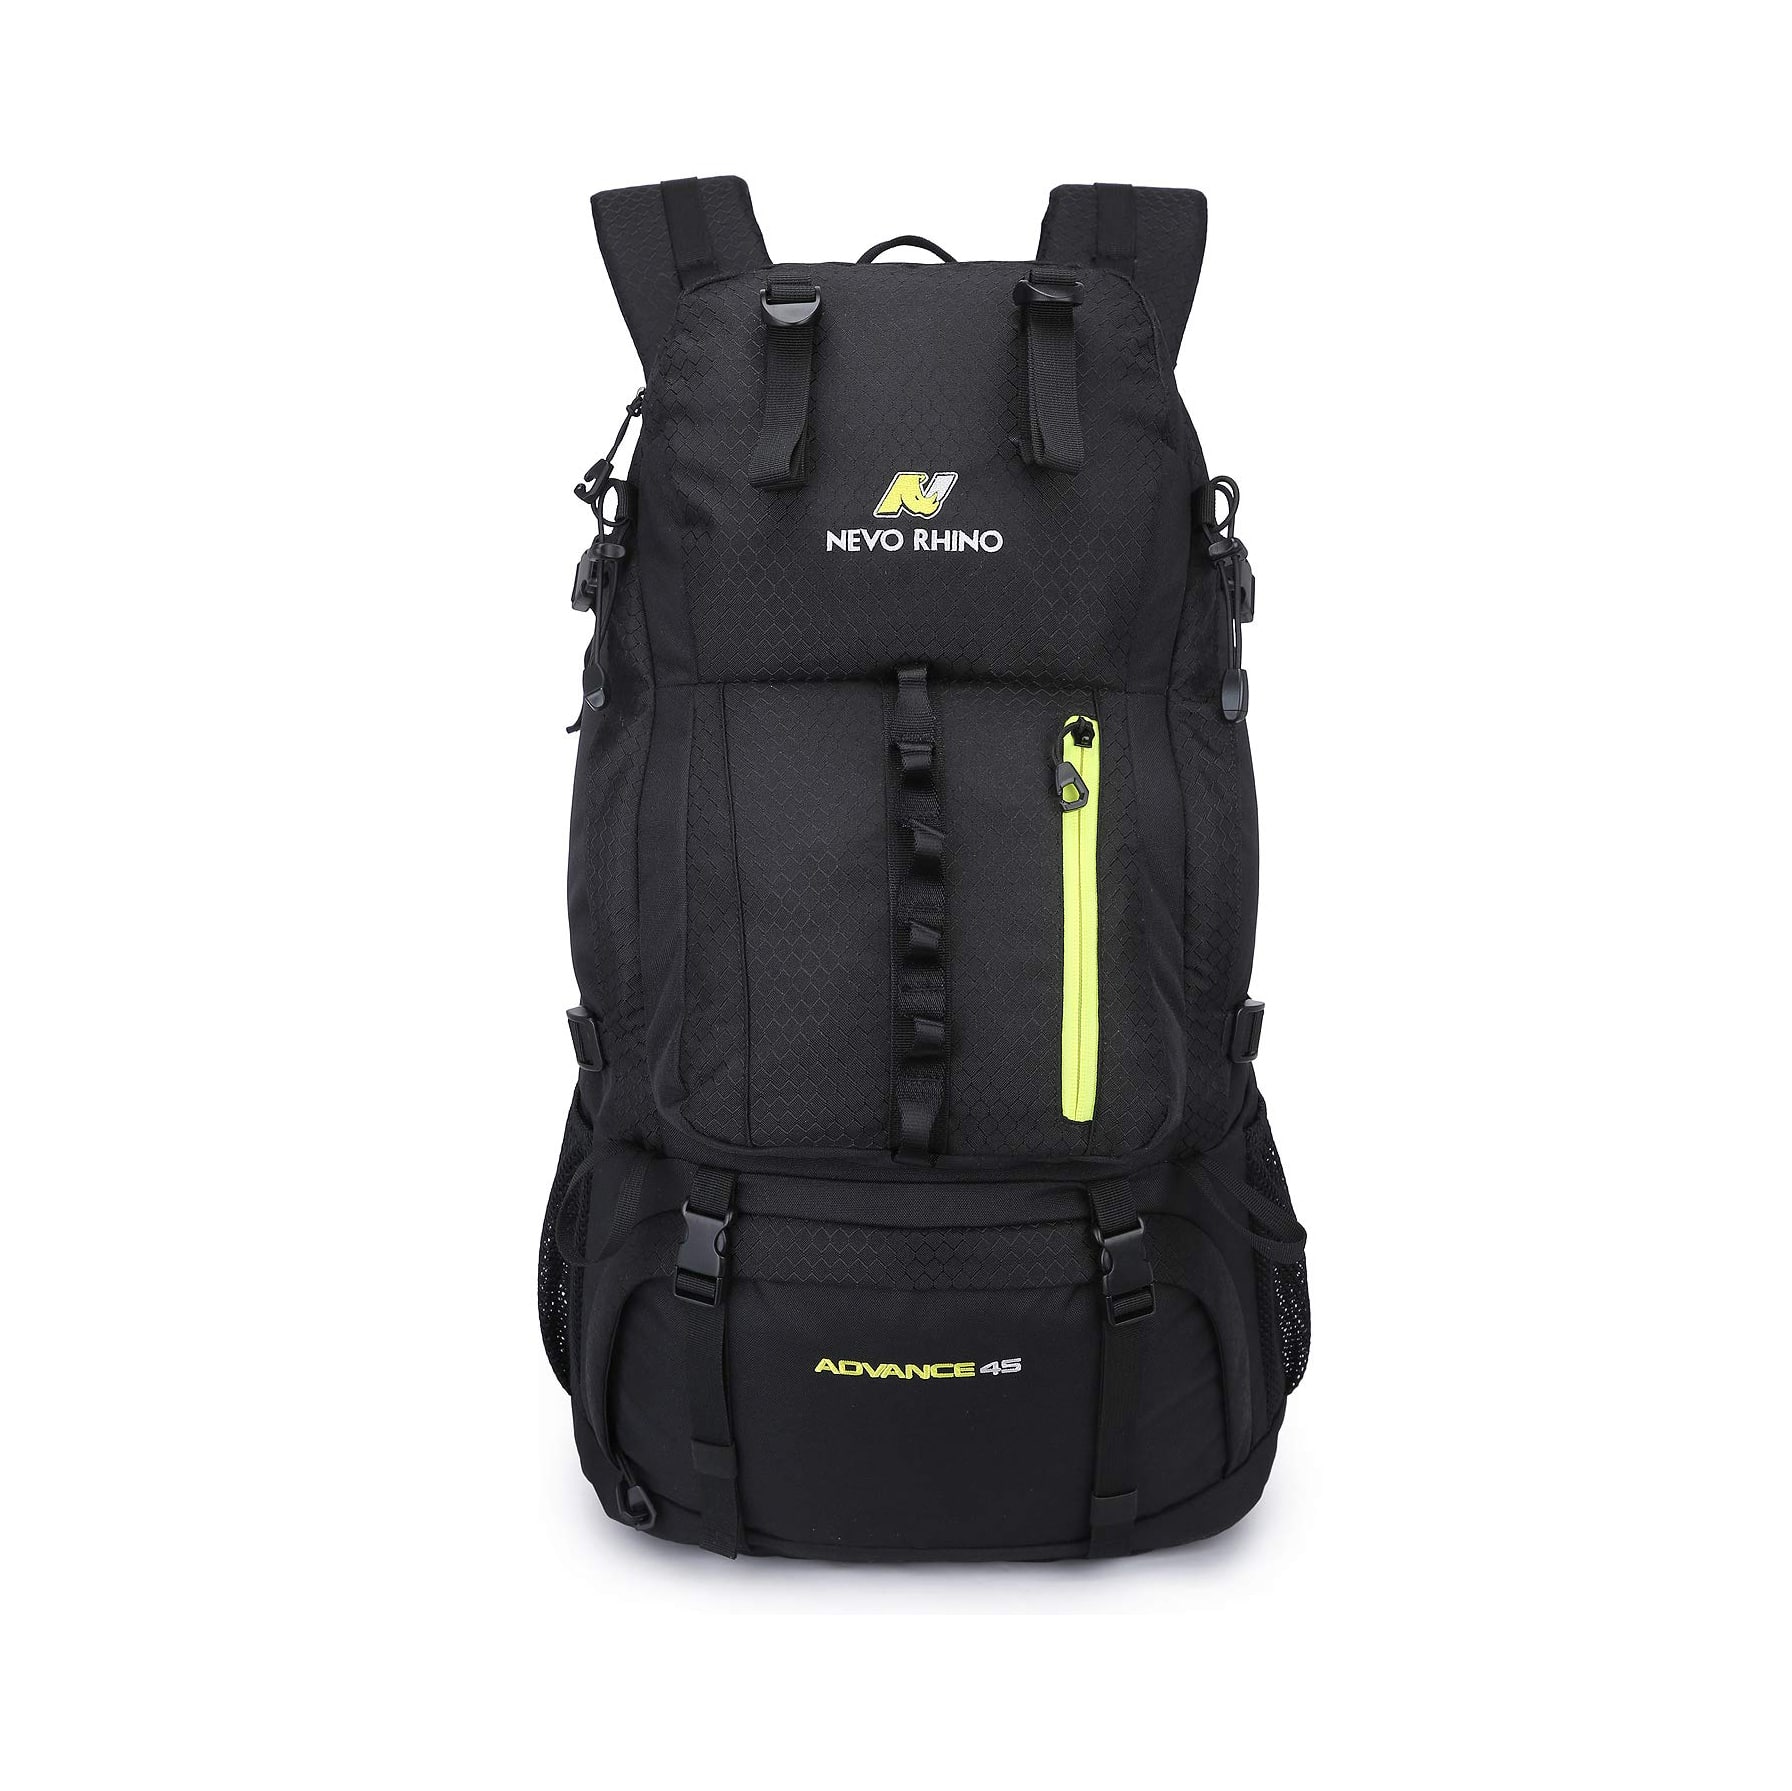 Top 10 Best Hiking Backpacks in 2021 Review | Guide